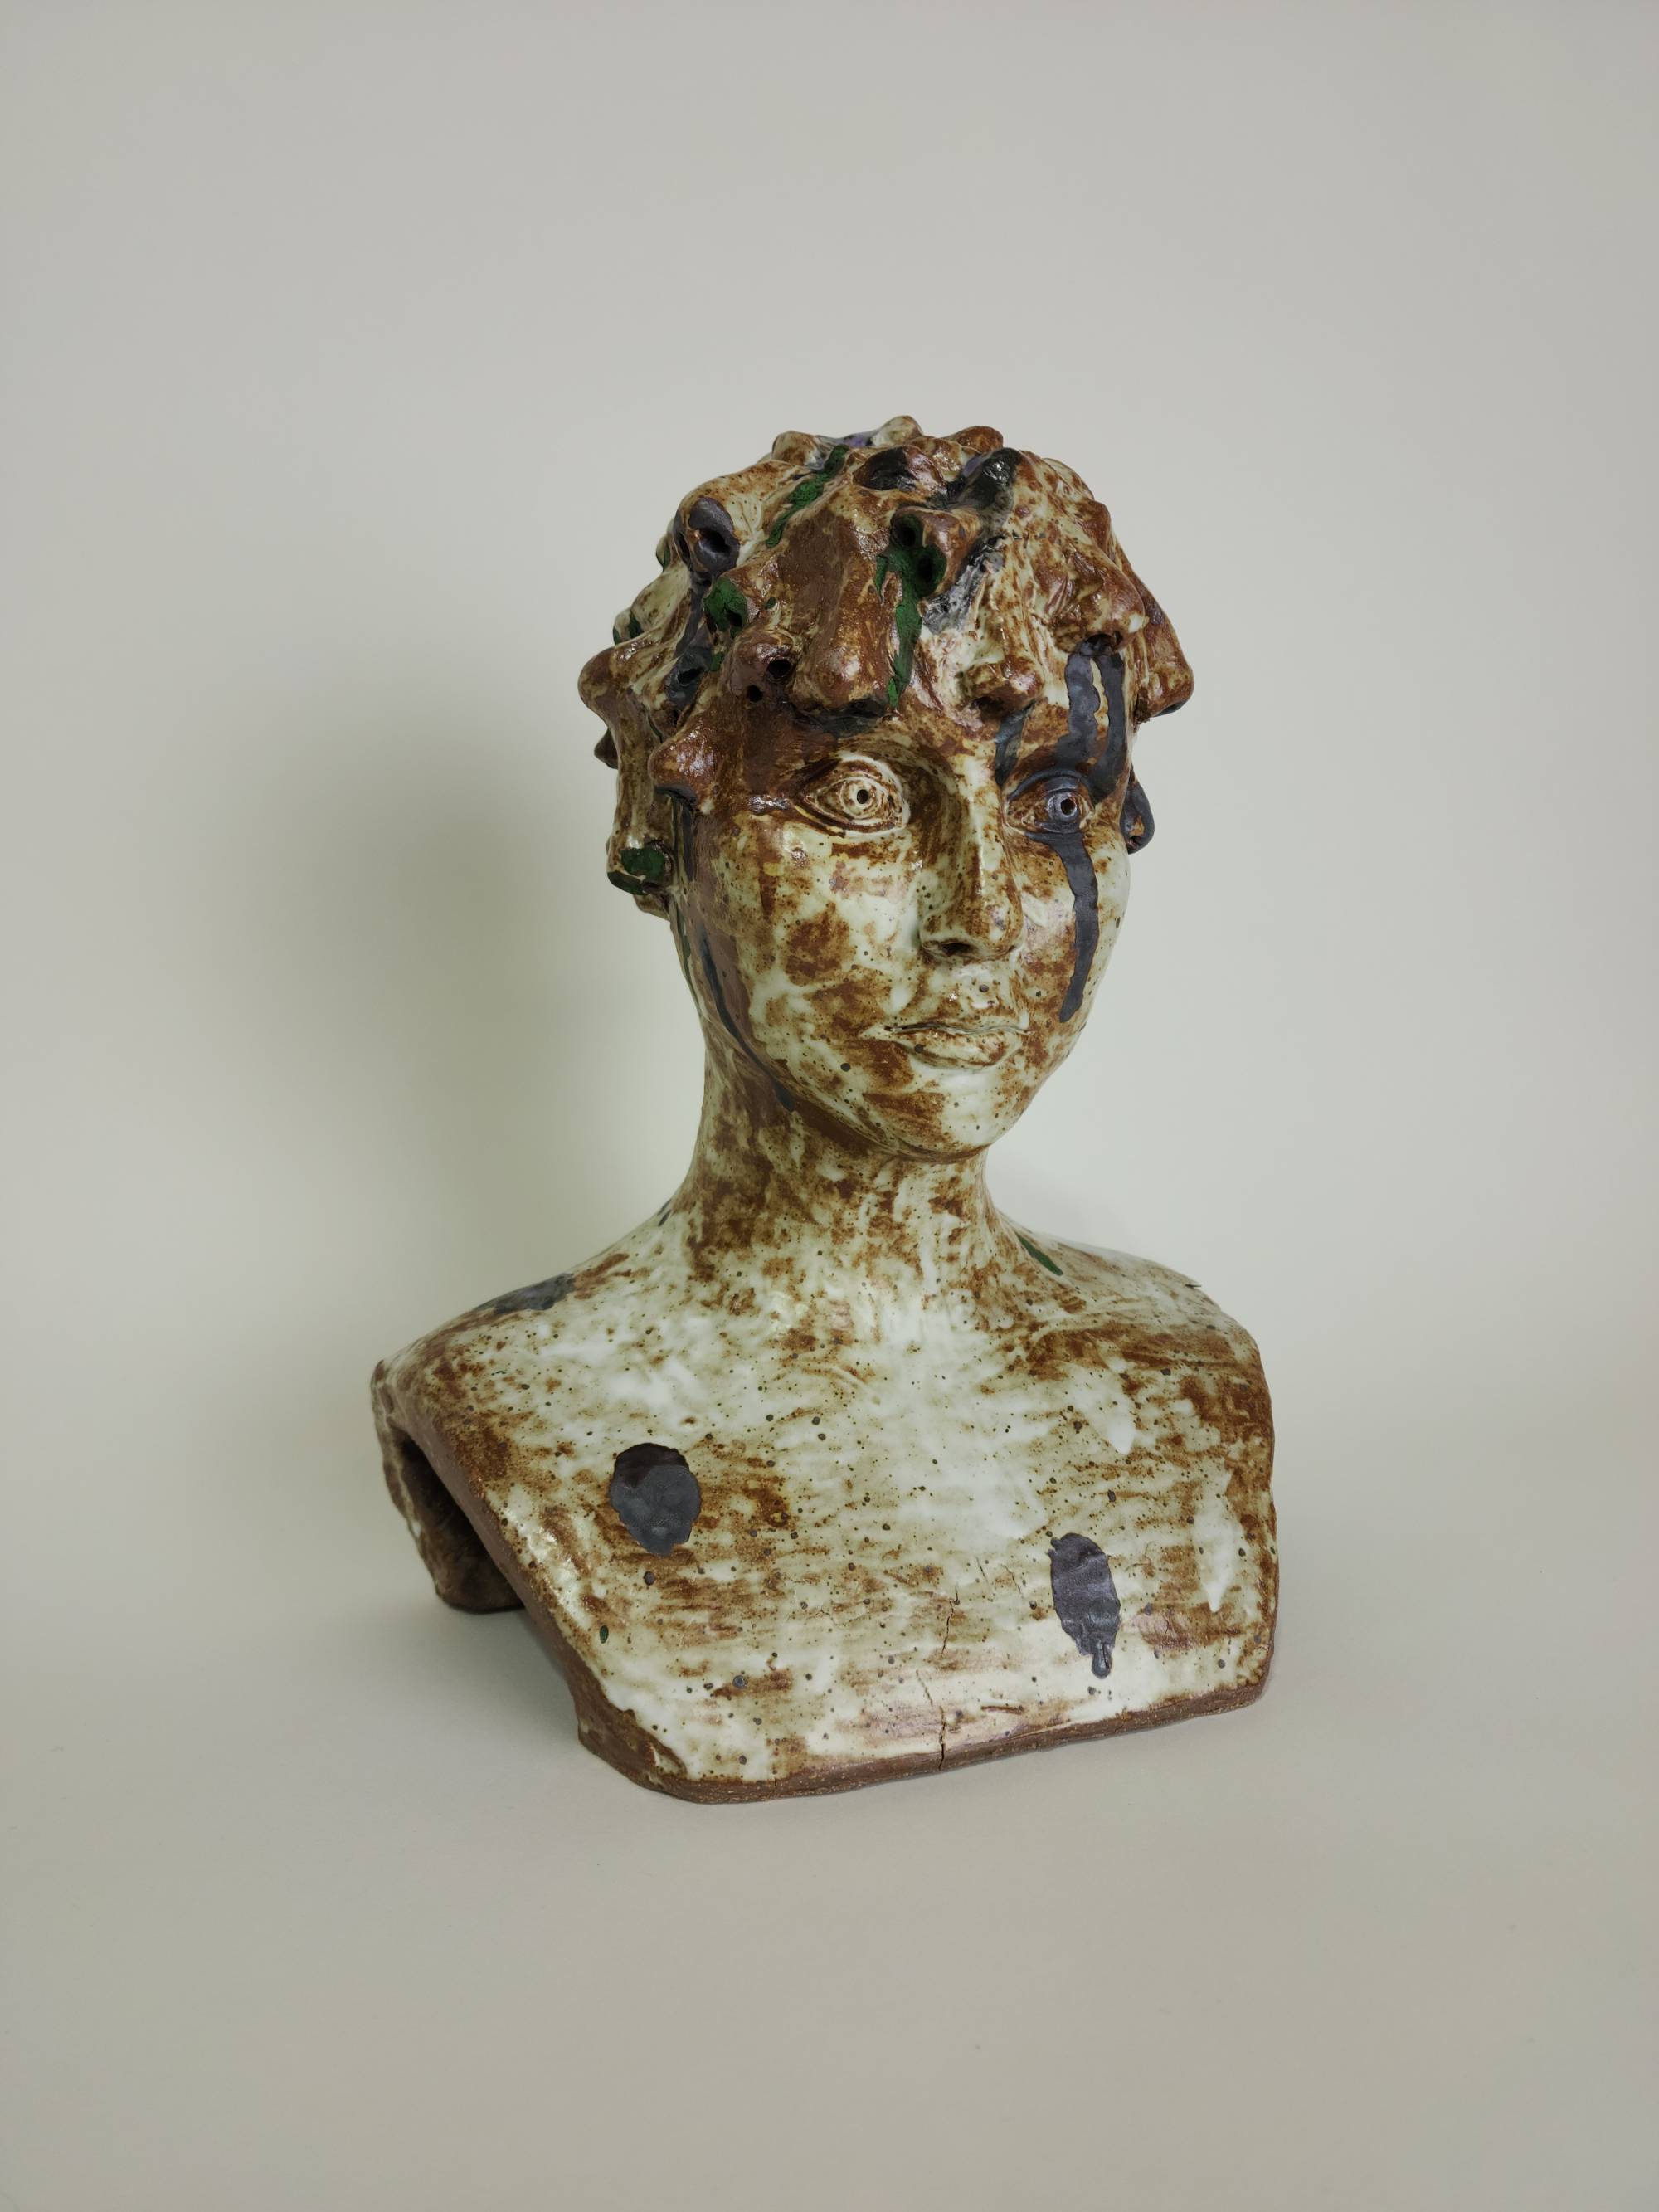 Ceramic bust of a person